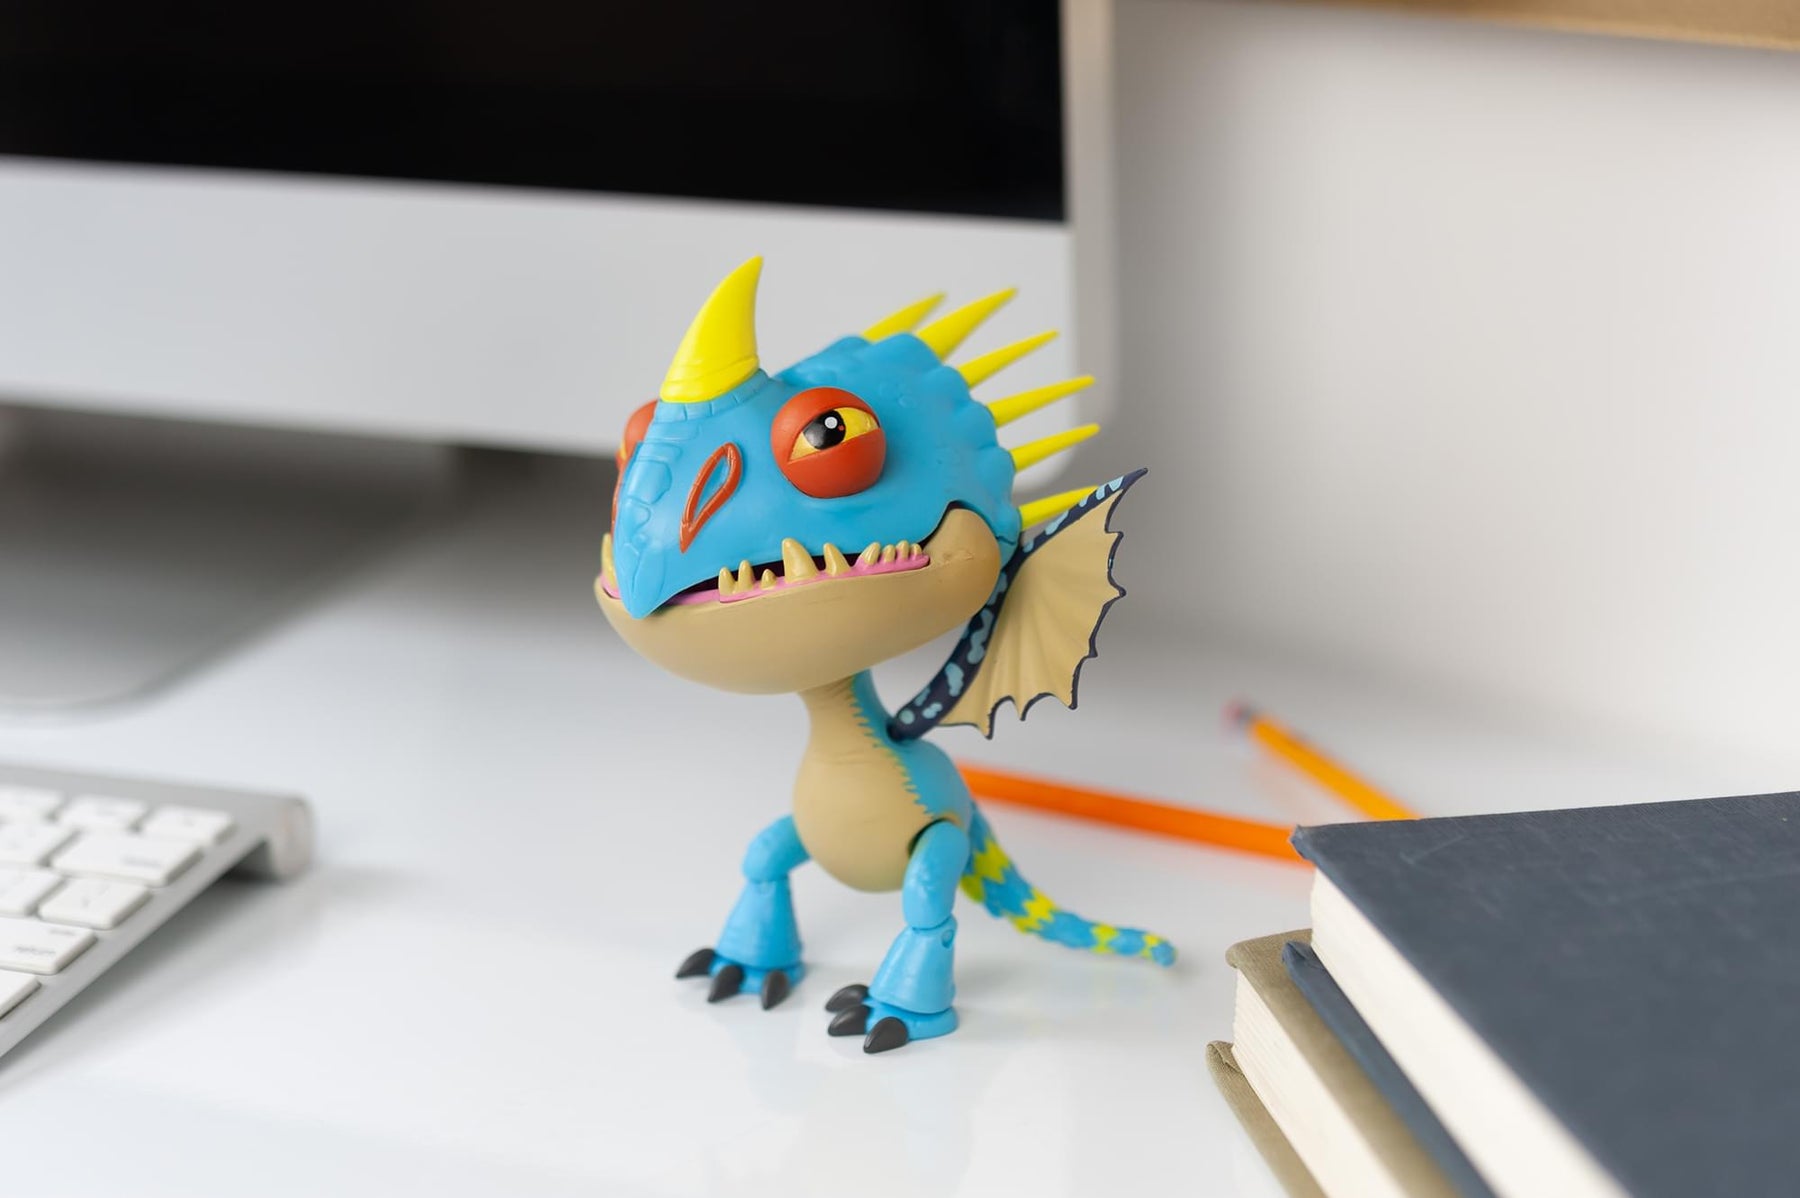 How To Train Your Dragon 6"-7" Action Vinyl: Stormfly